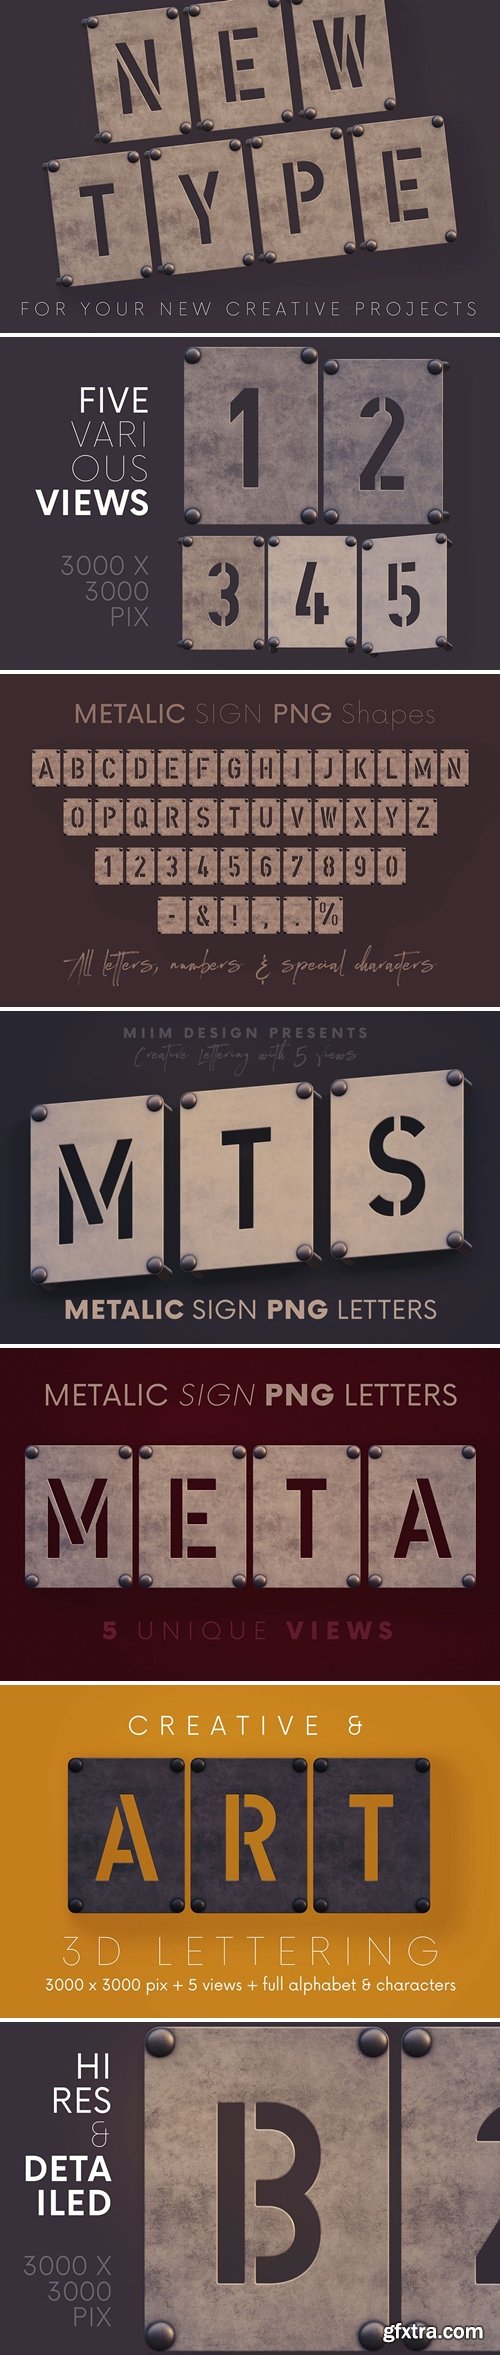 Metalic Sign - 3D Lettering